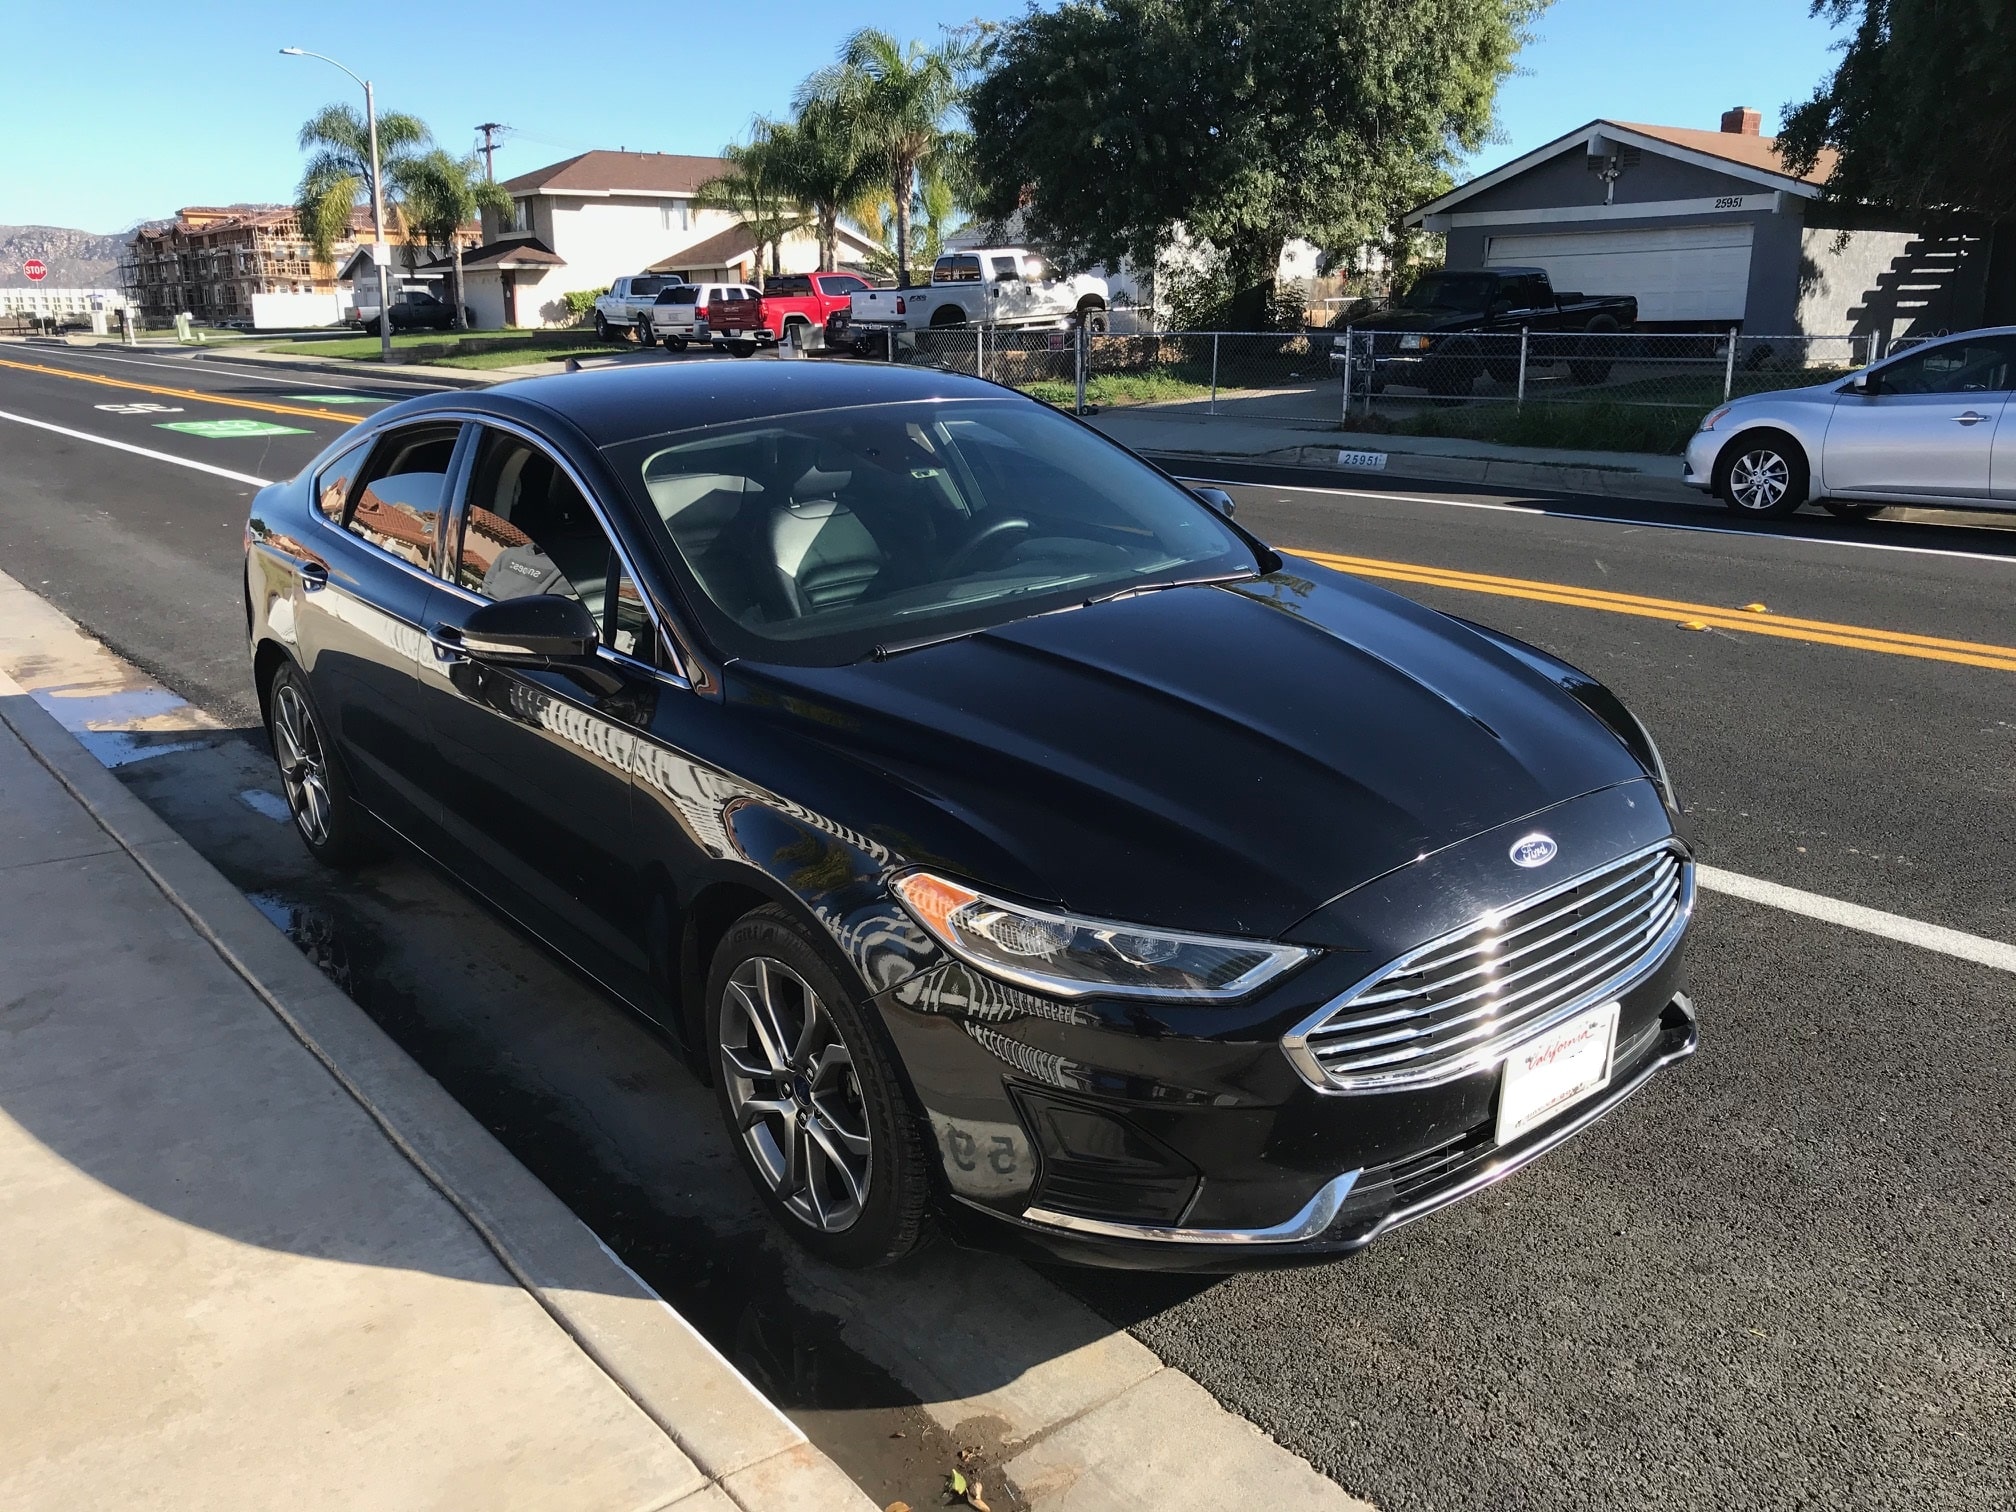 Junk ford fusion engine problem